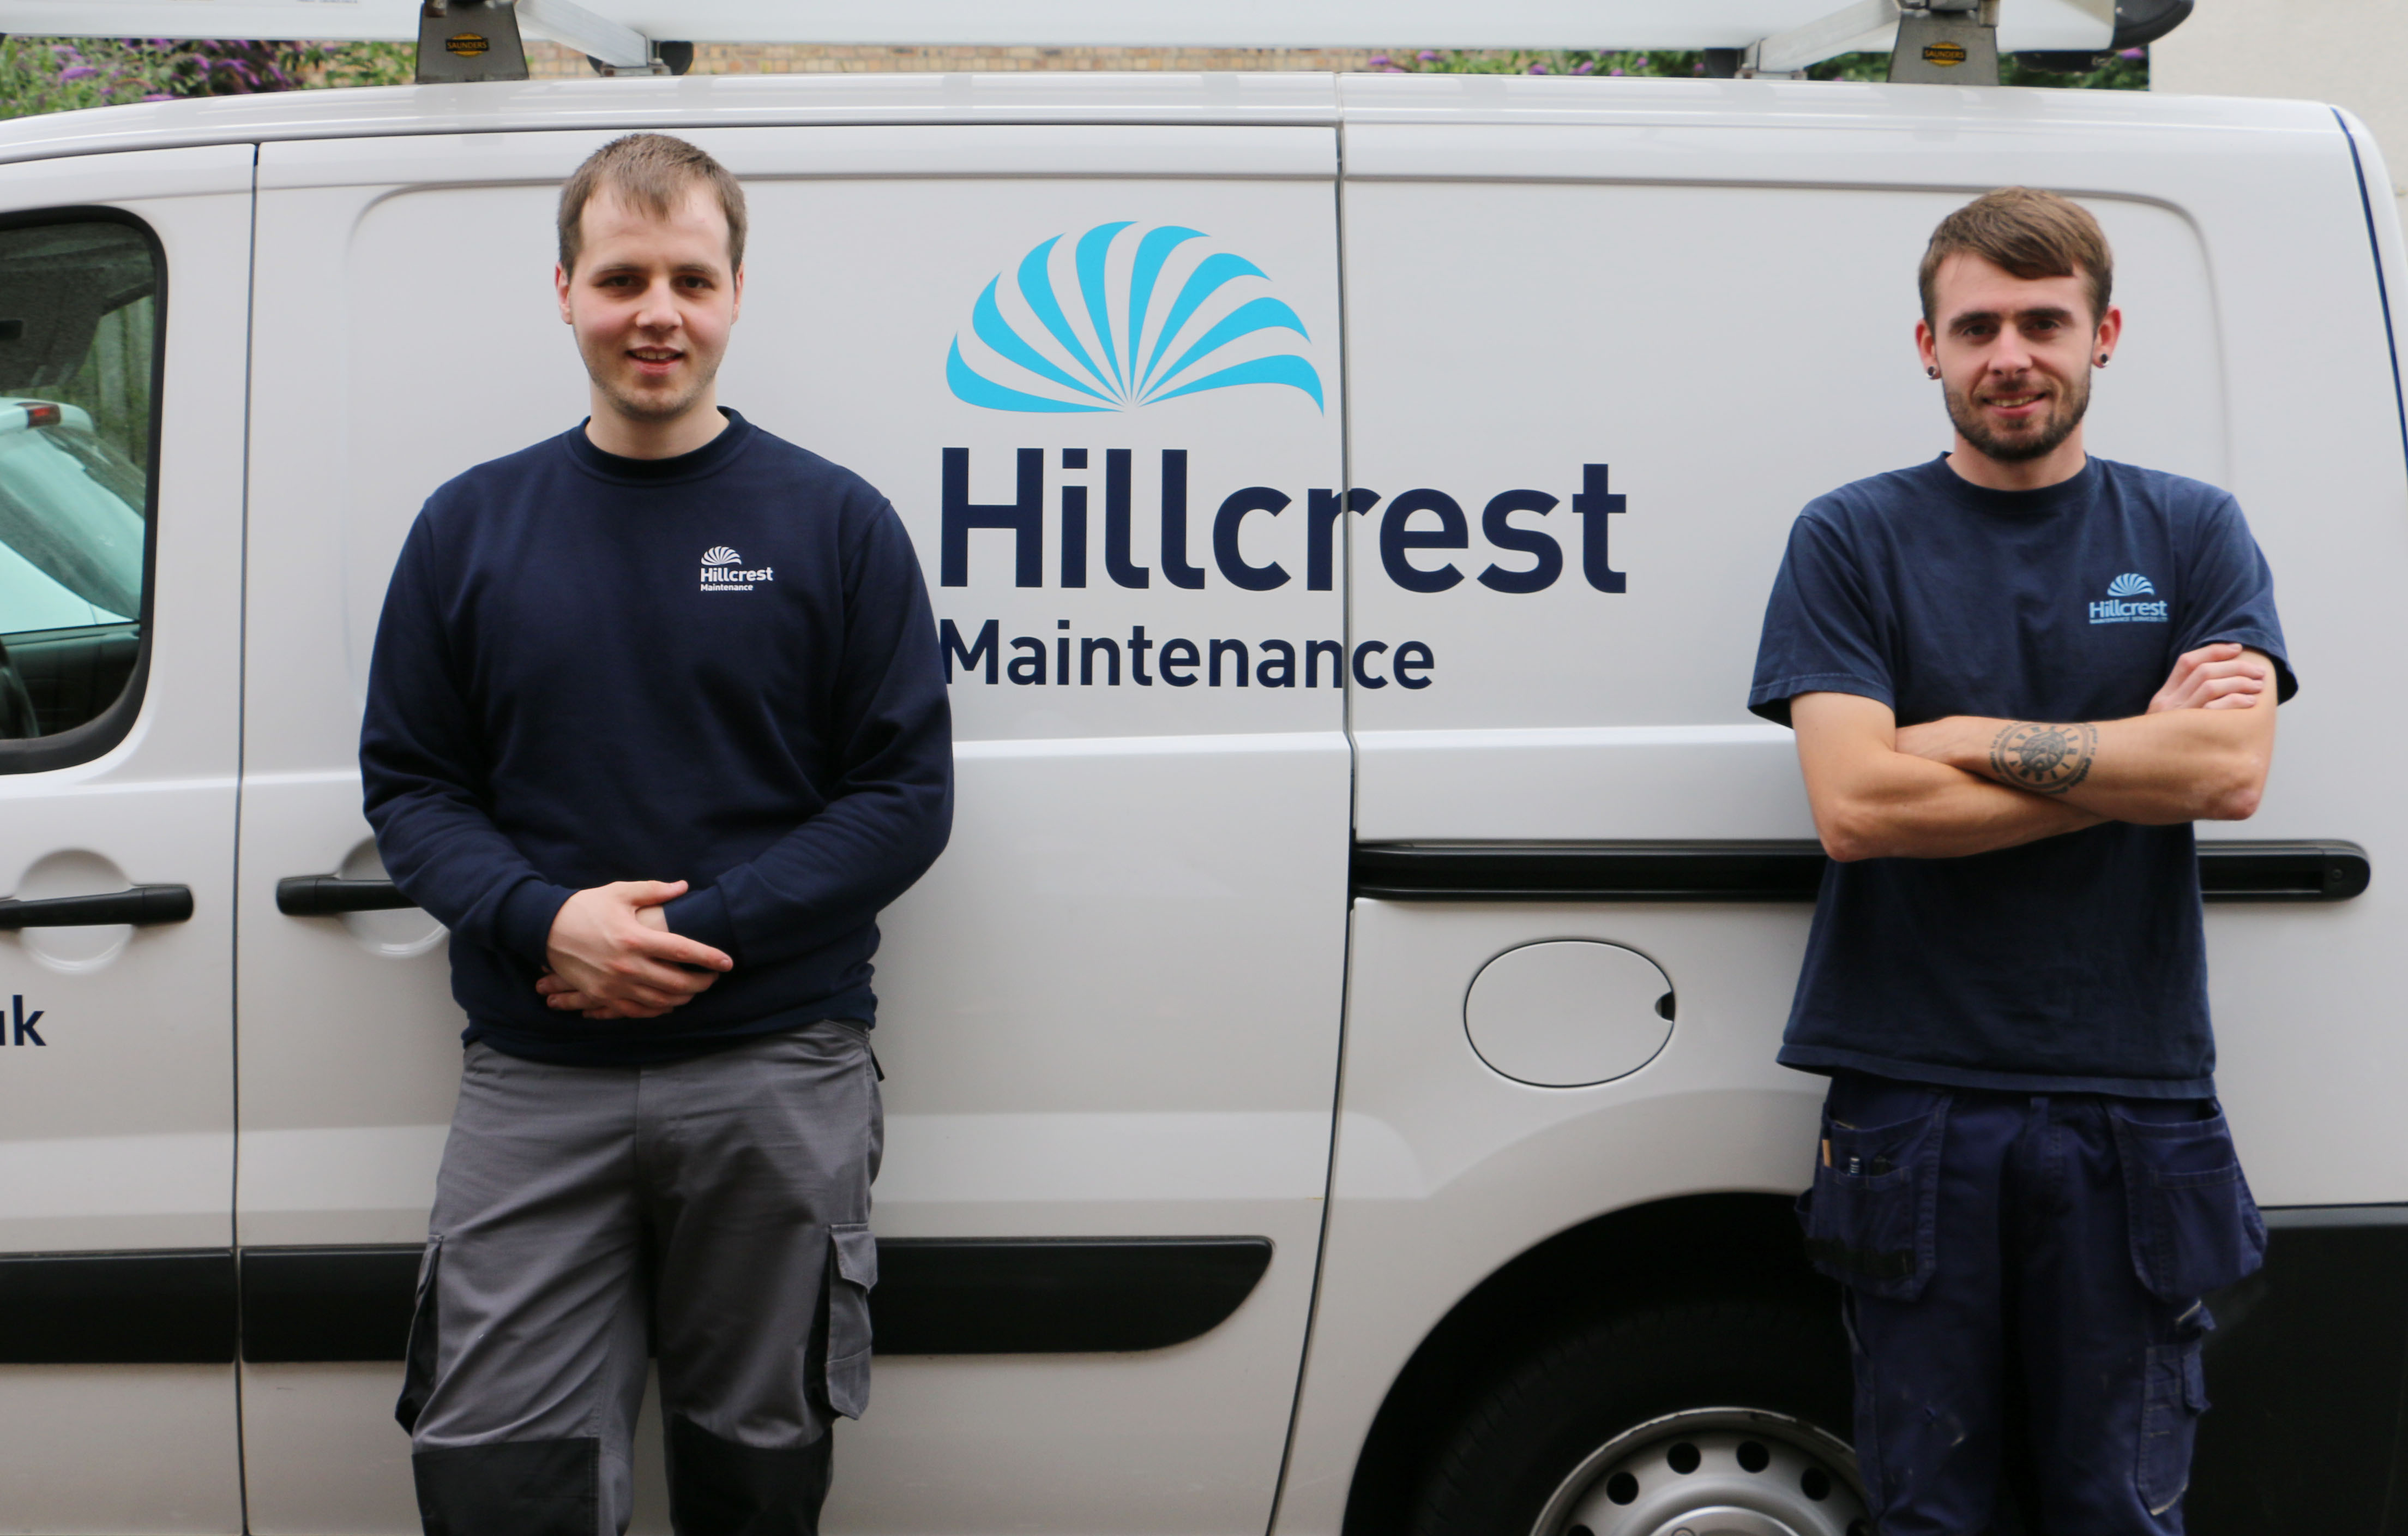 Hillcrest Maintenance helps spark bright future for local student